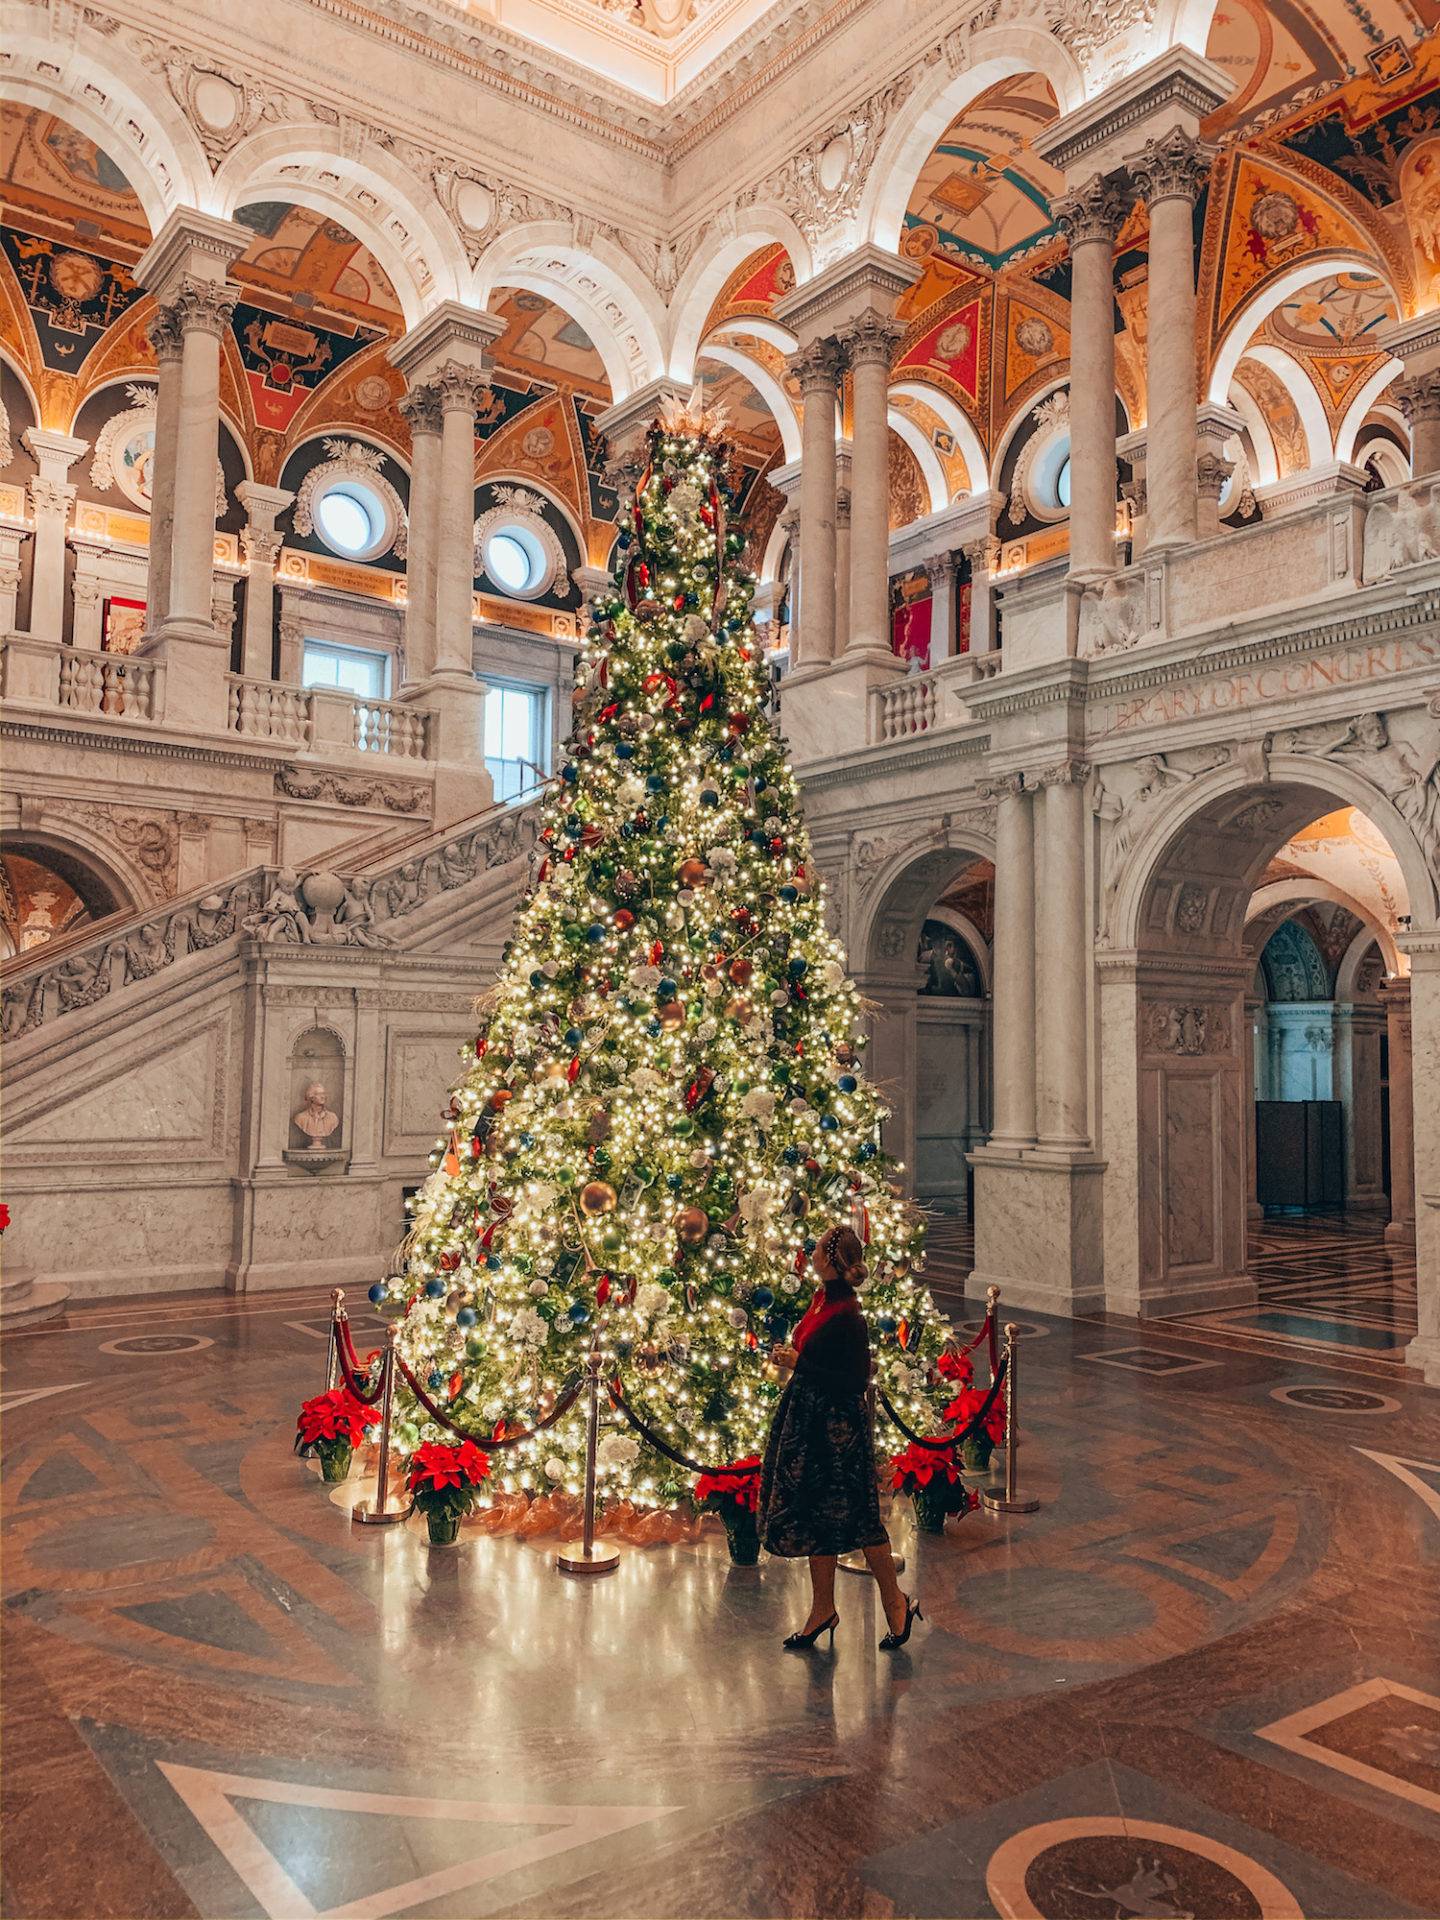 Festive things to do in Washington at Christmas time: Visit the Library of Congress and check out their beautiful Christmas tree.